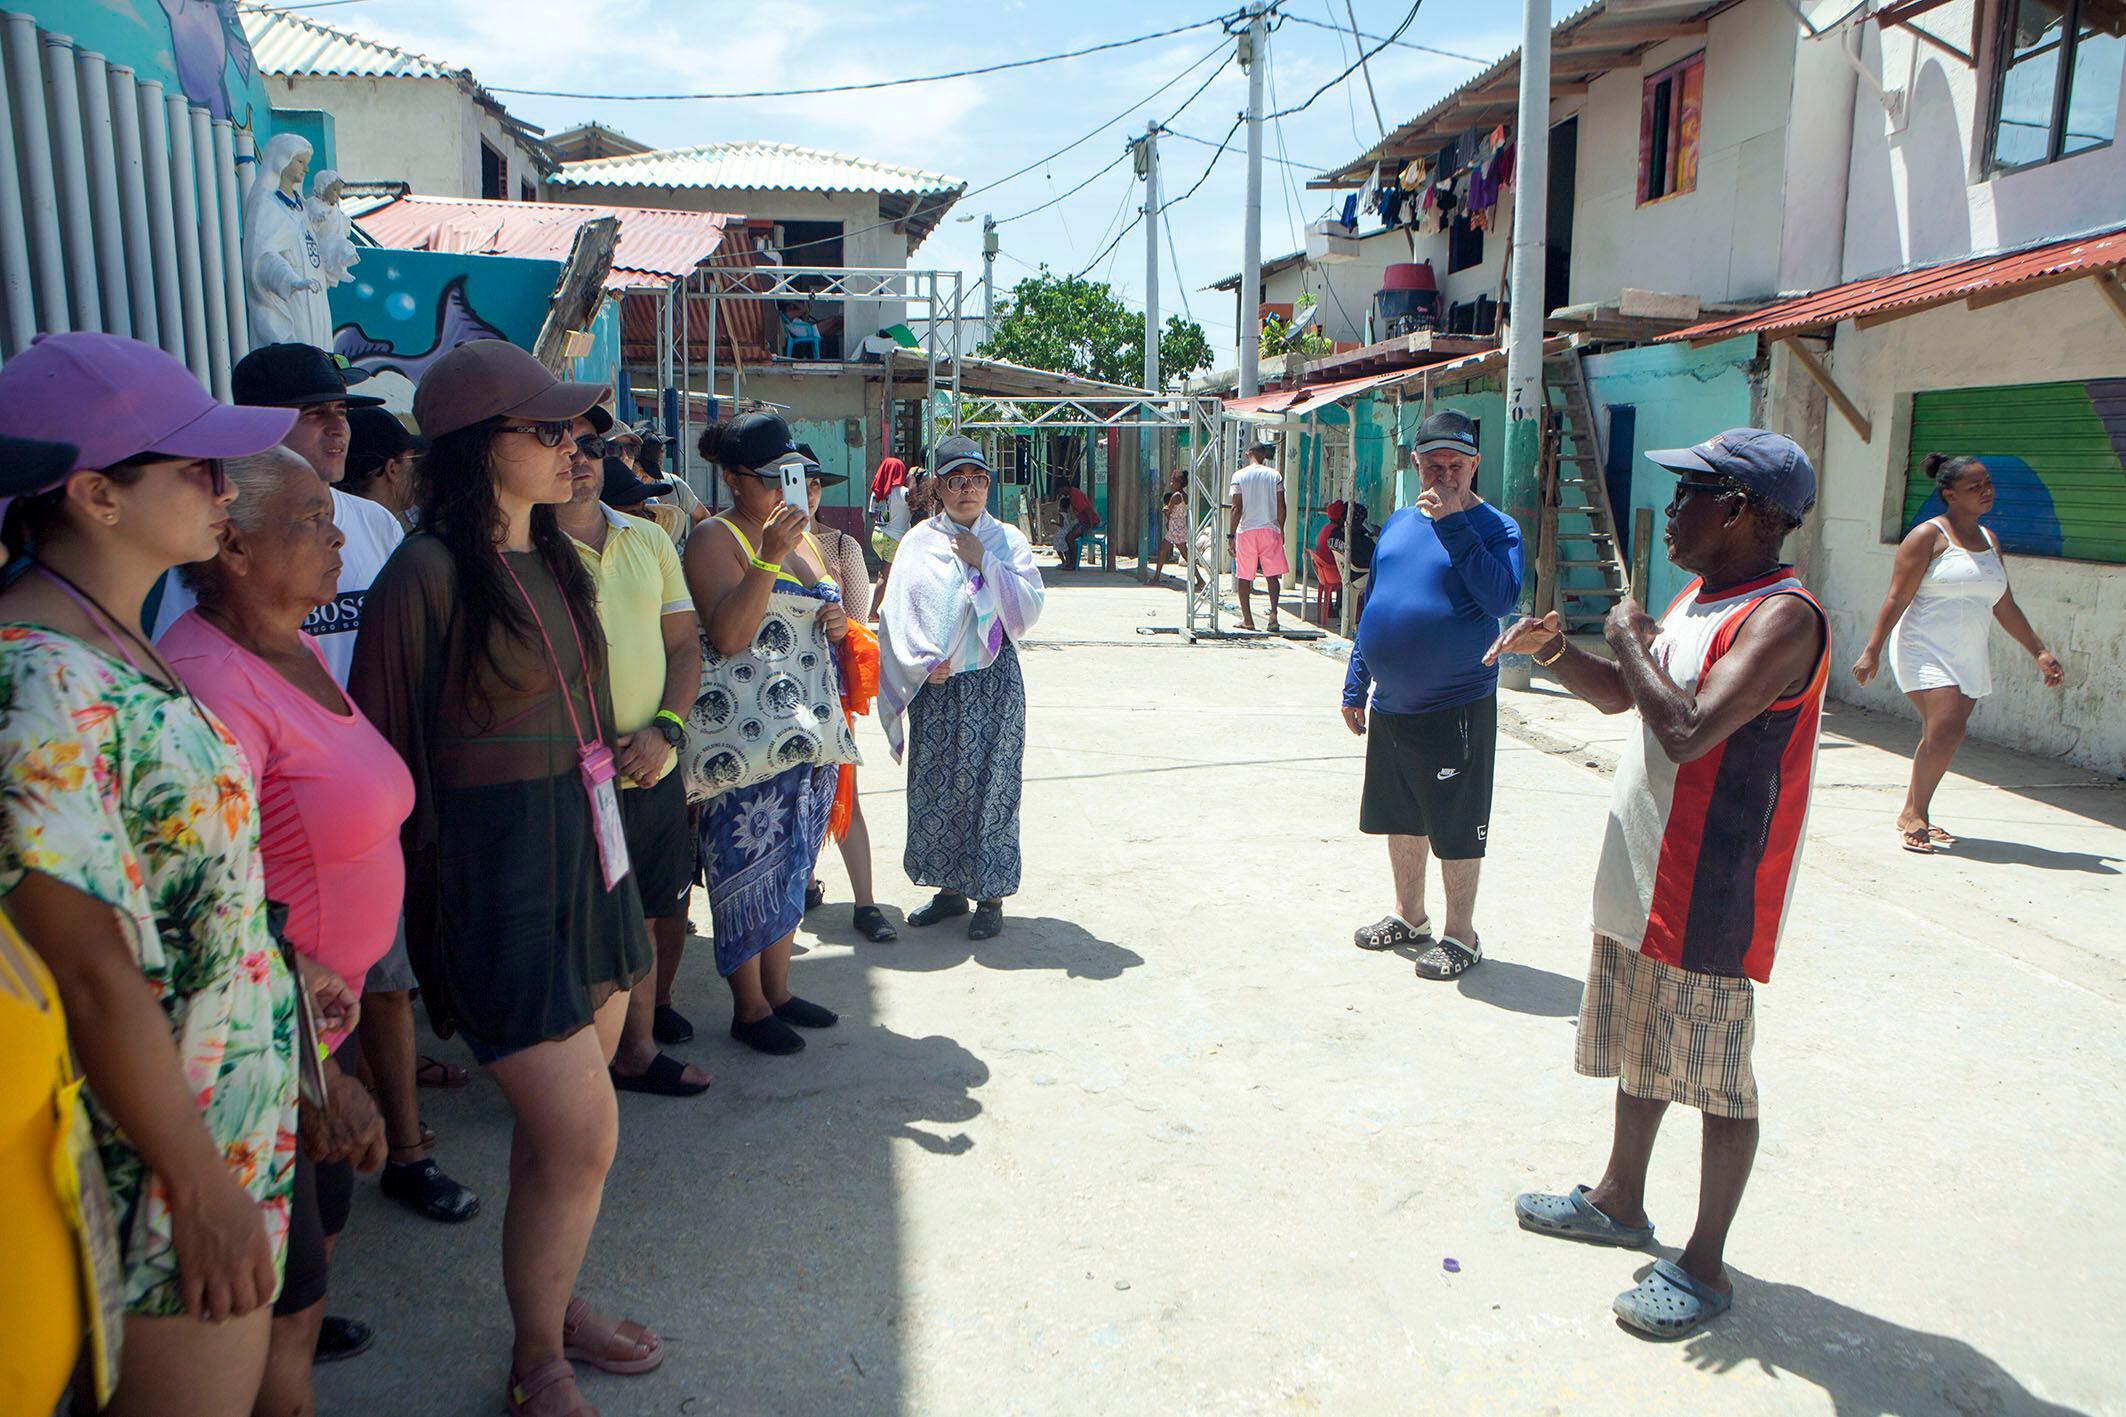 A tour guide explains interesting facts about Santa Cruz del Islote to a group of visitors.